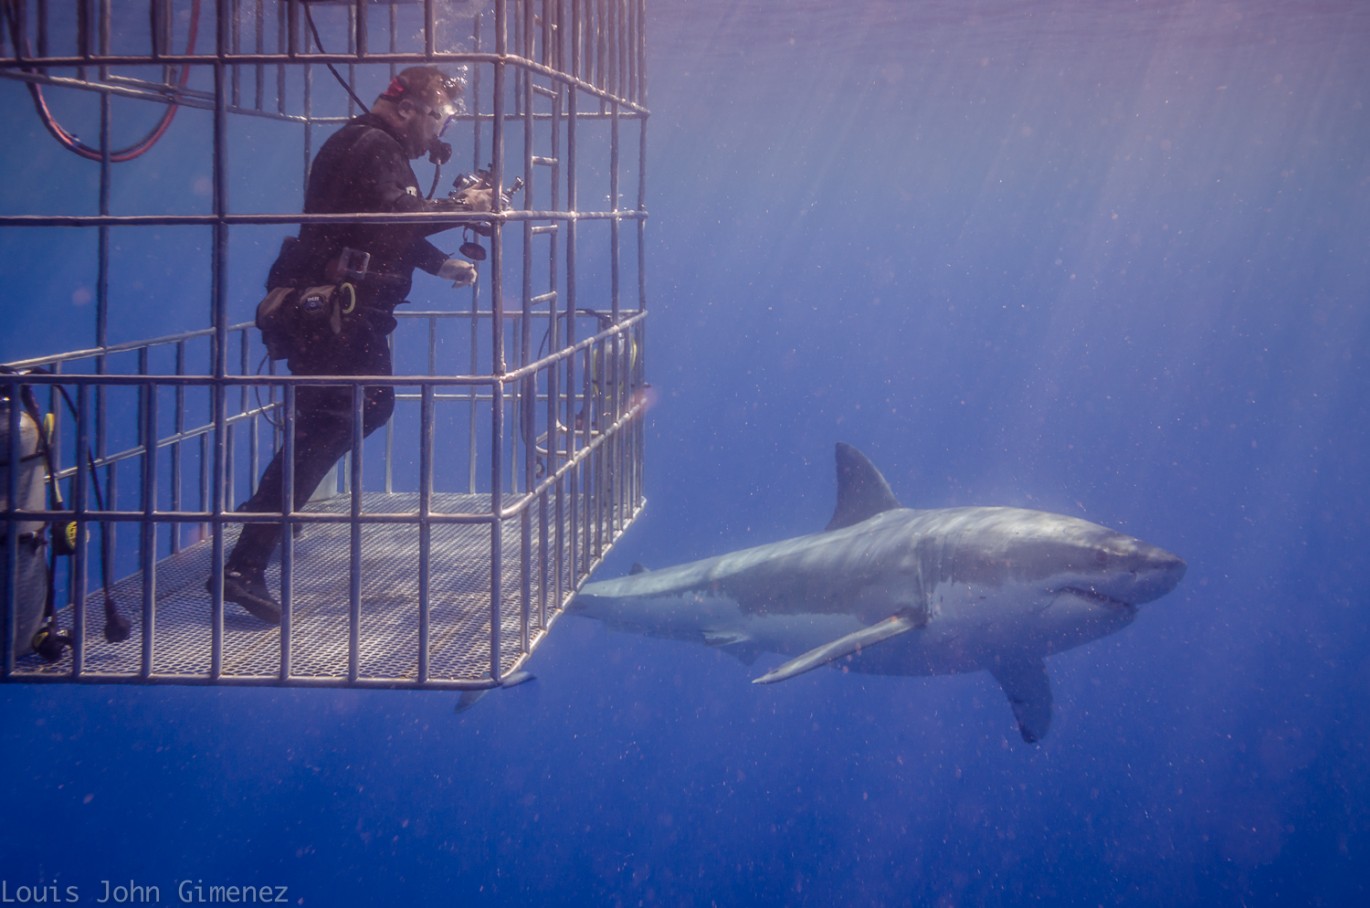 shark gets up close to diver in cage